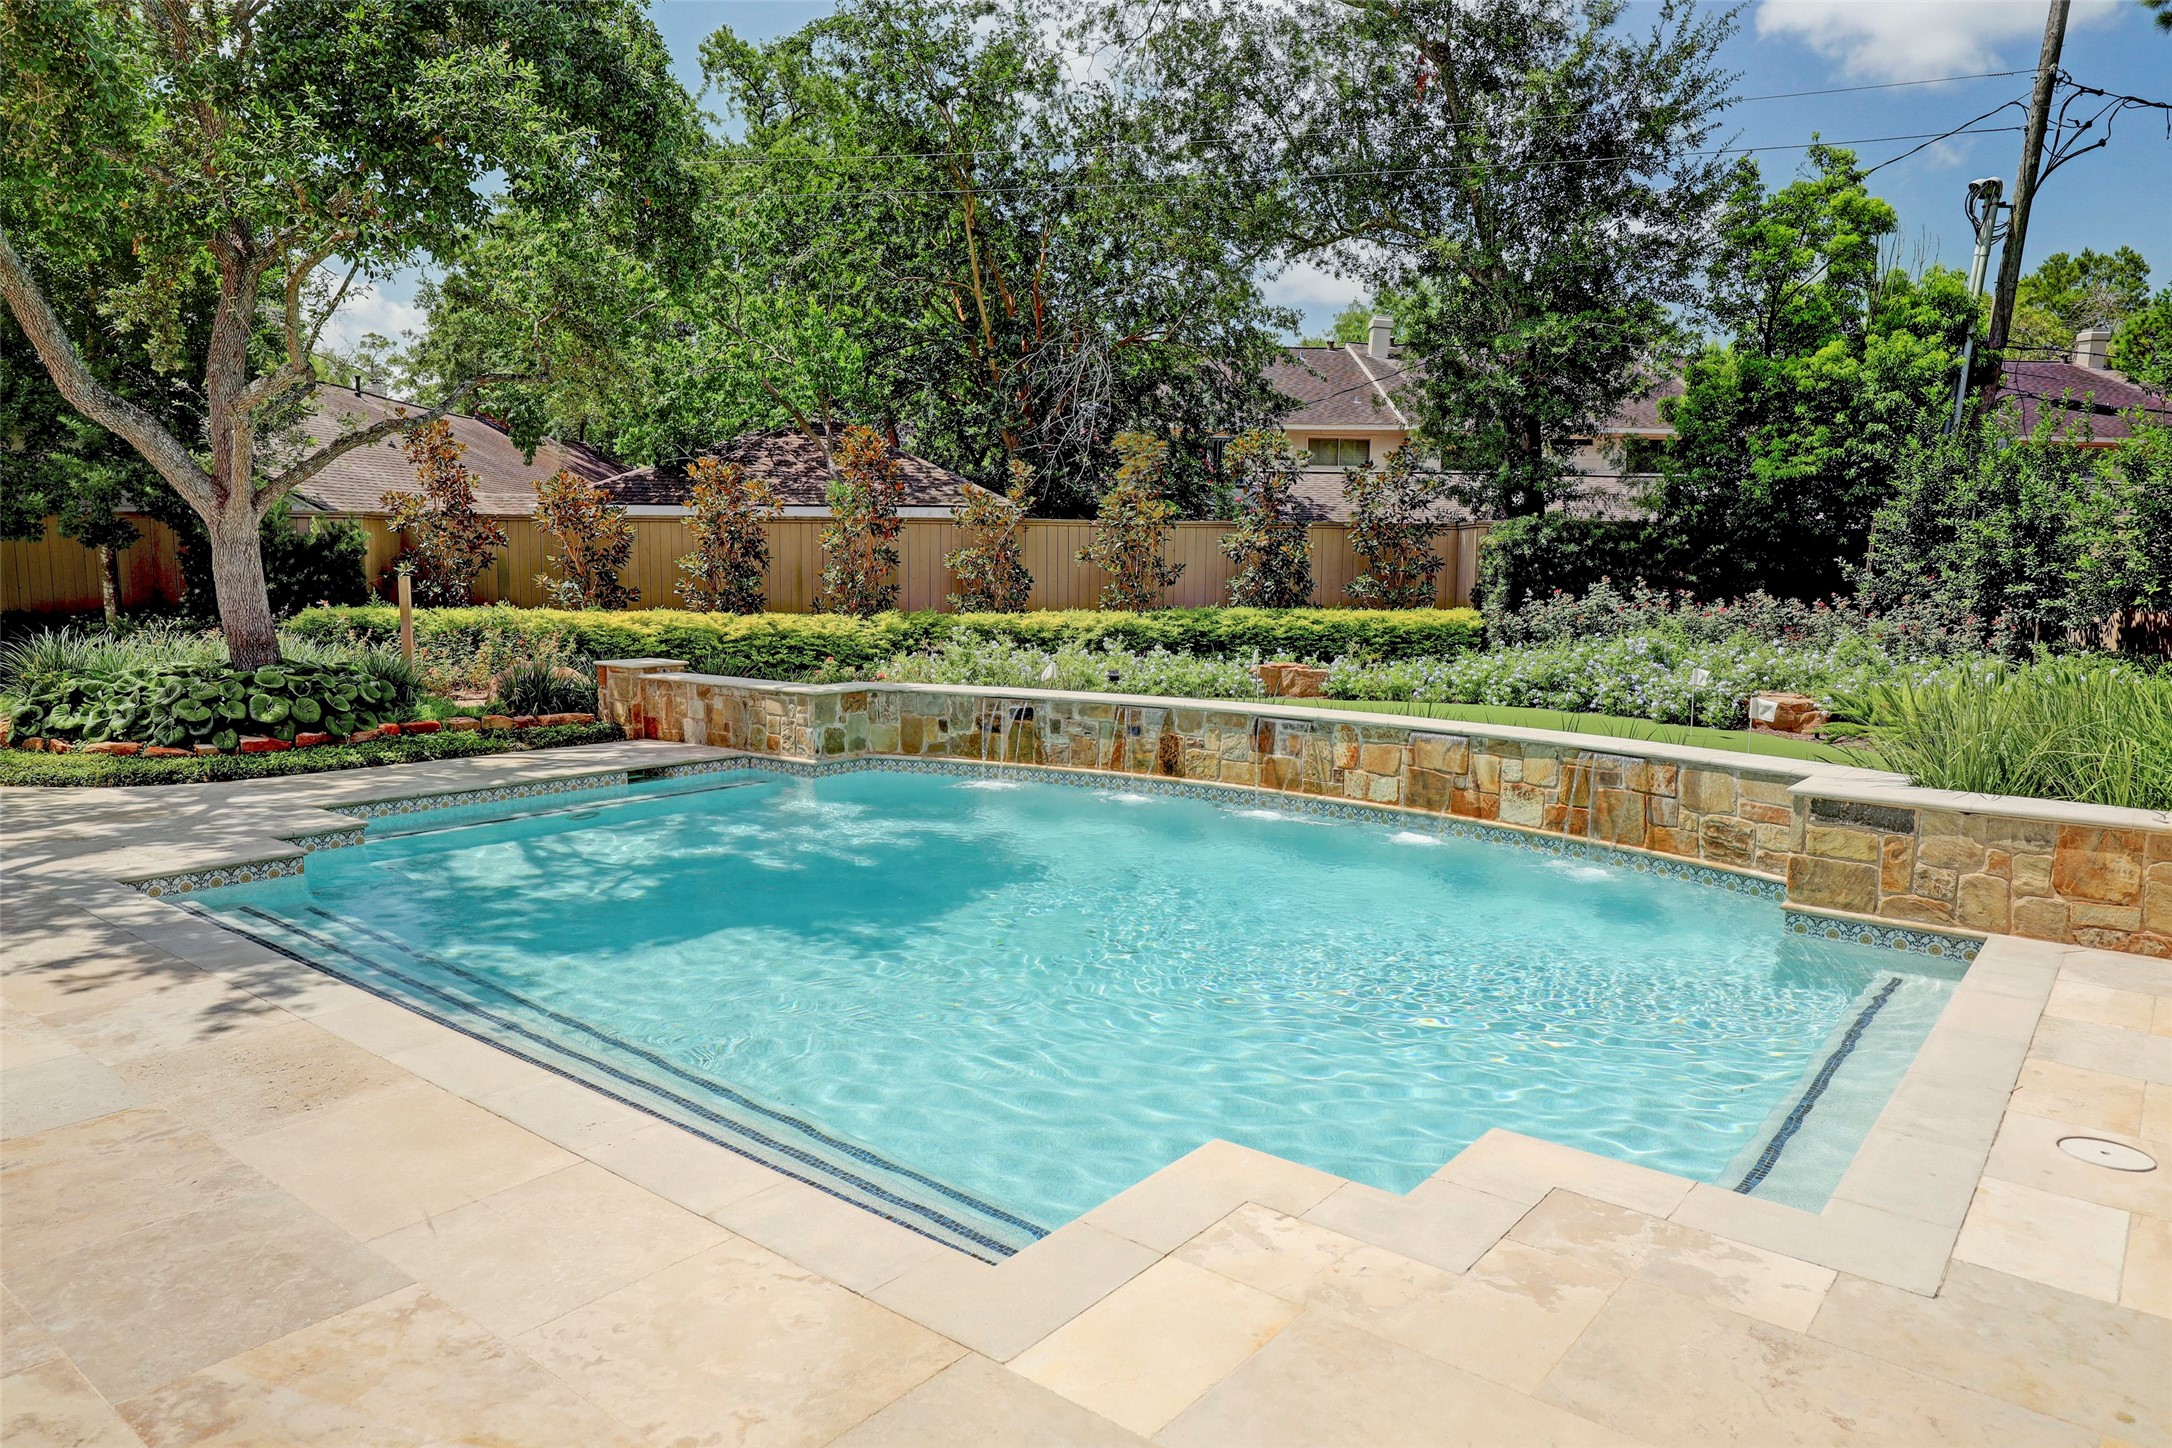 Another view of the inviting pool.